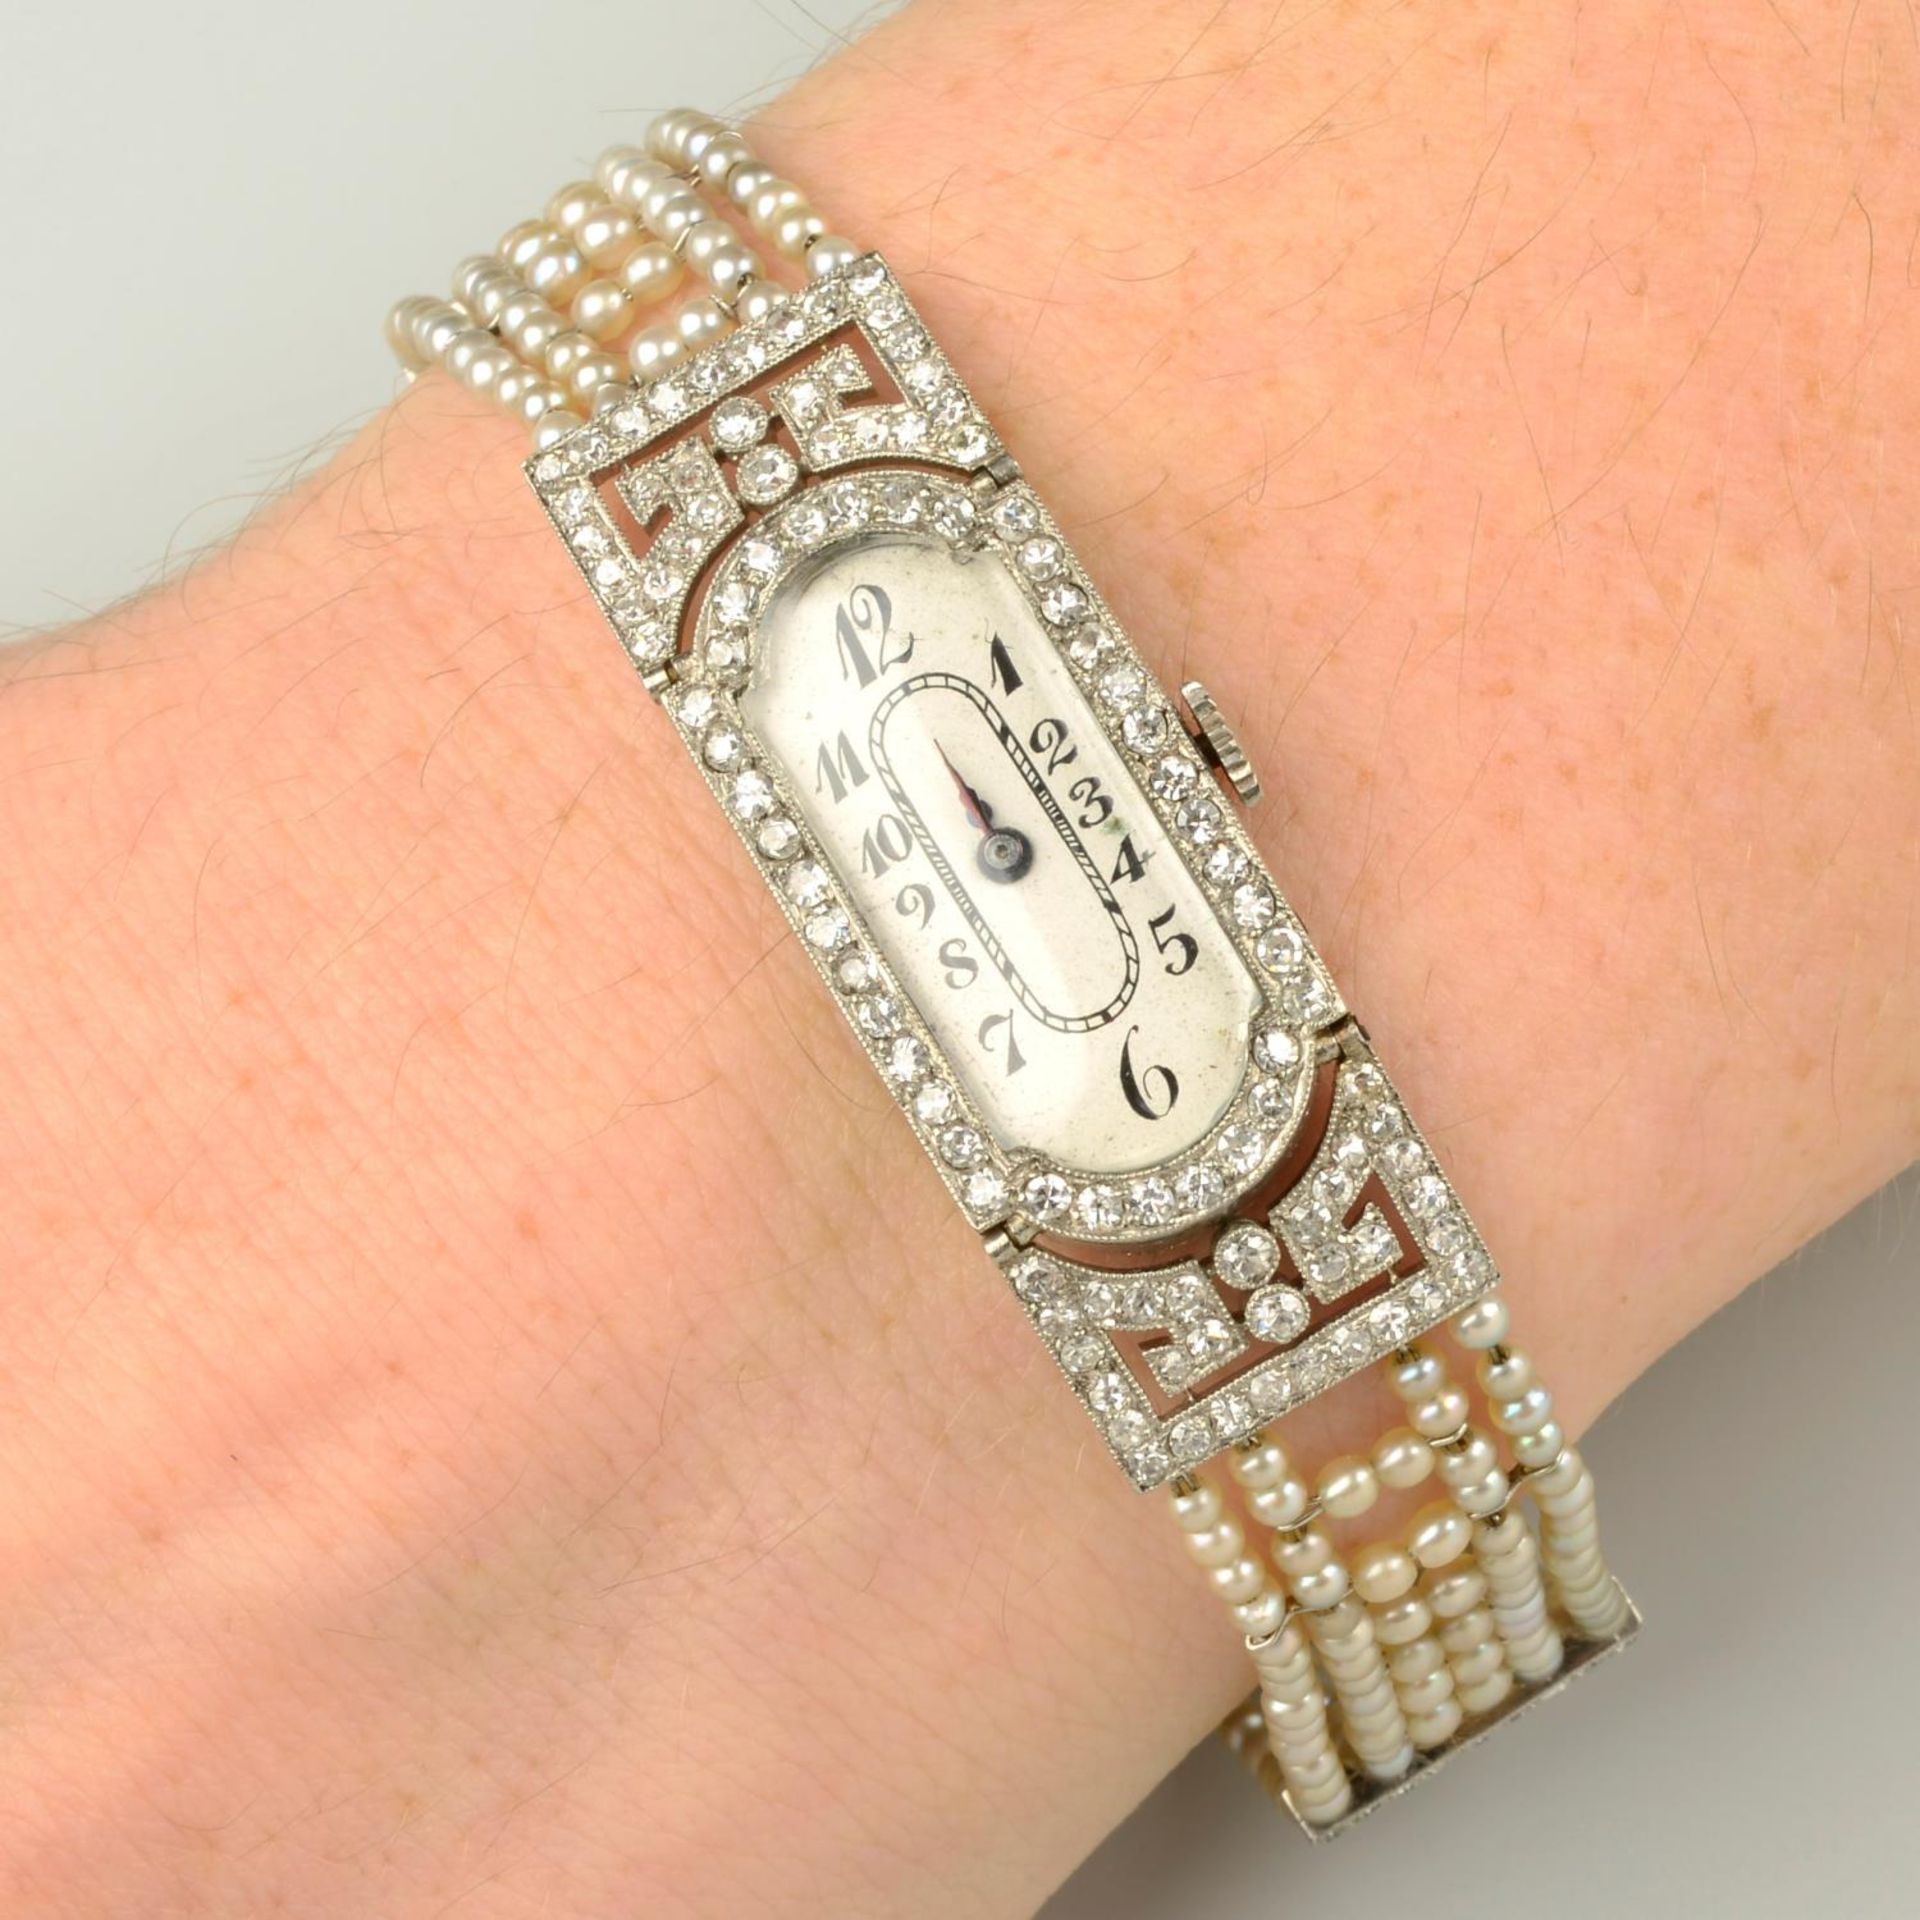 A lady's Art Deco platinum and 18ct gold diamond wristwatch, with seed pearl and diamond strap.